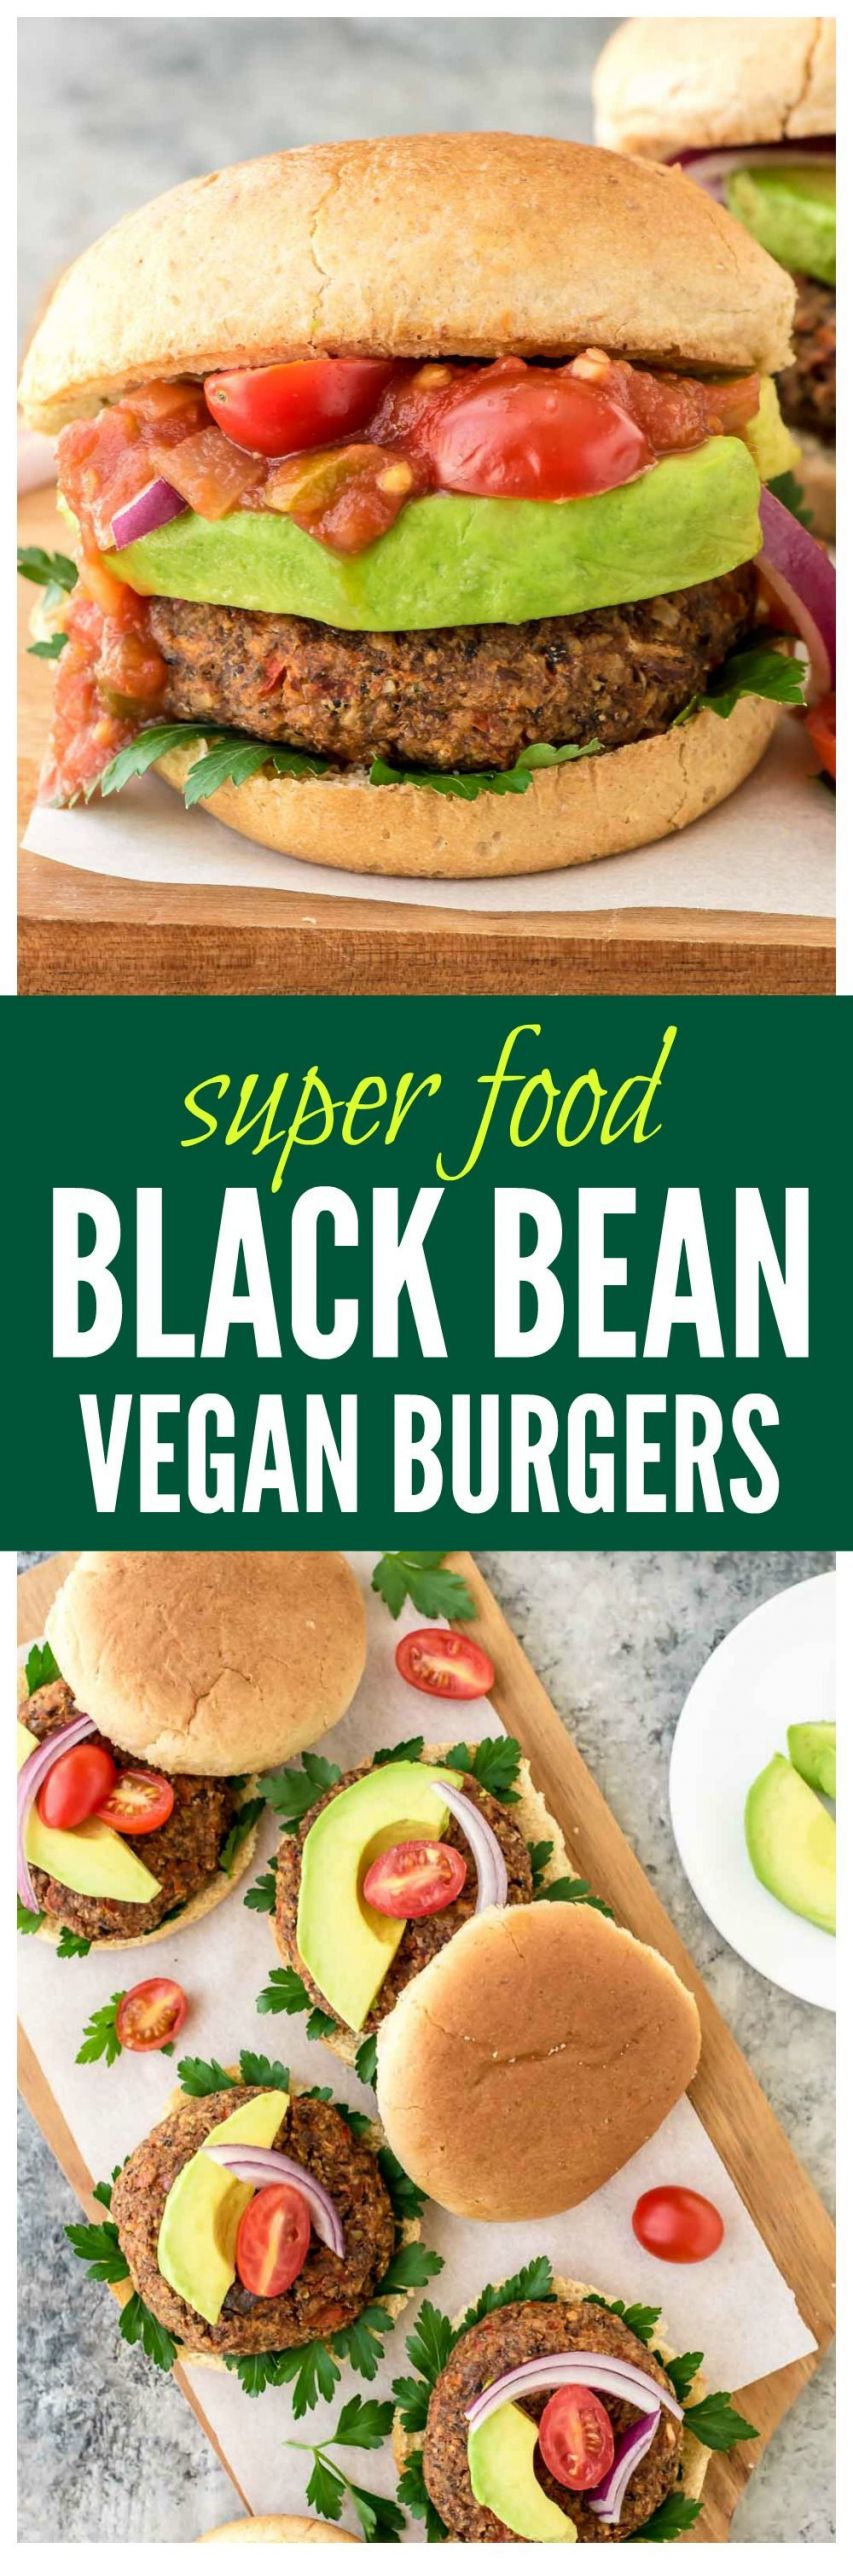 High Fiber Vegetarian Recipes
 High protein fiber Omega 3s and DELICIOUS Try these